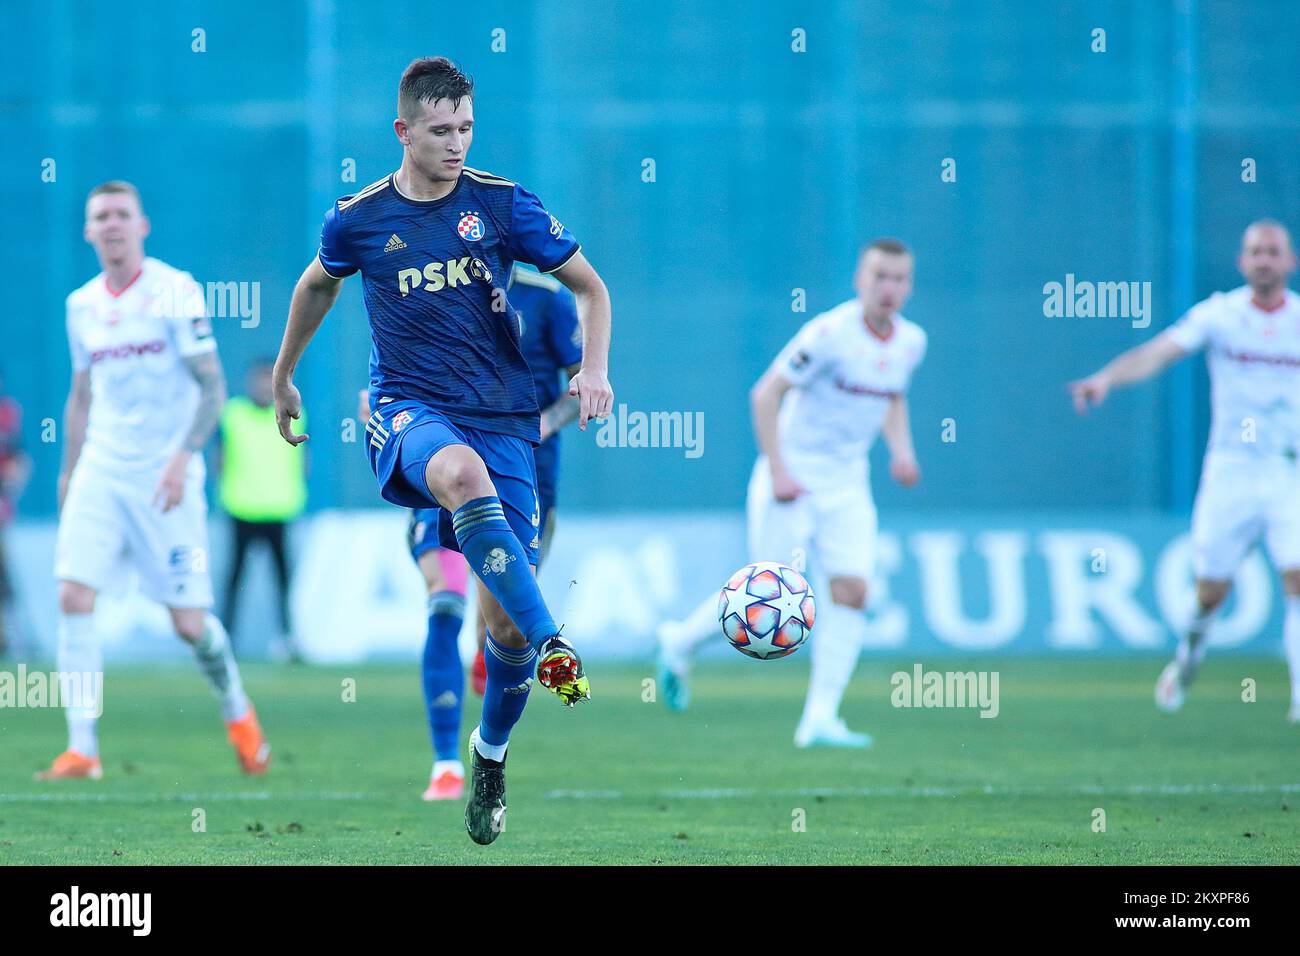 Daniel Stefulj of Dinamo Zagreb passes the ball during UEFA Champions League First Qualifying Round match between GNK Dinamo Zagreb and Valur at Maksimir Stadium in Zagreb, Croatia on July 7, 2021. Photo: Goran Stanzl/PIXSELL Stock Photo